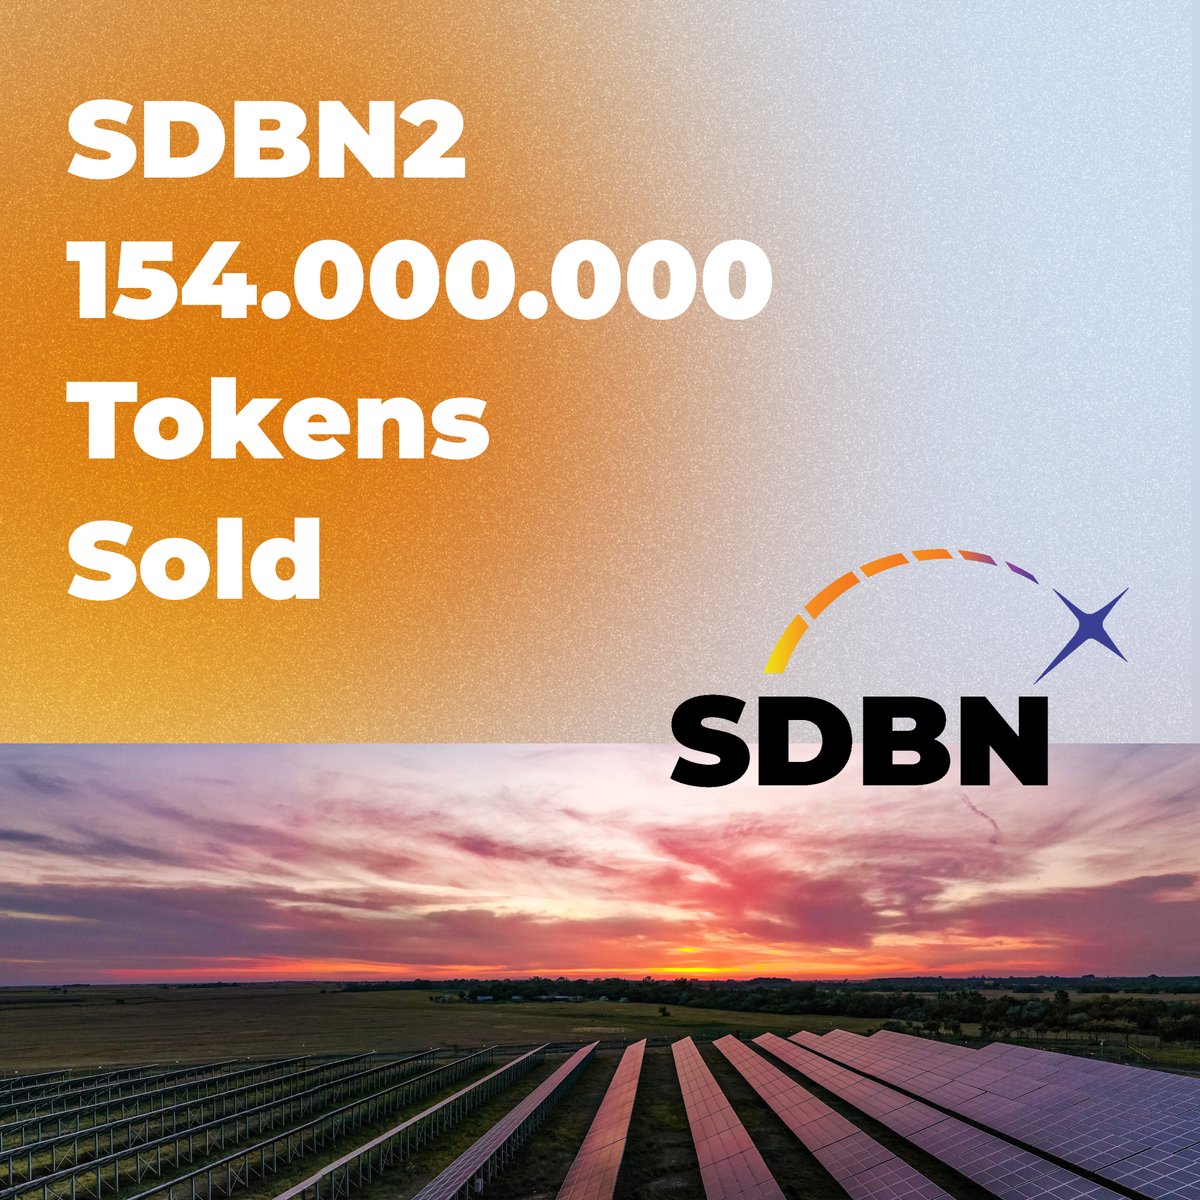 🔥 Over 154M SDBN2 tokens SOLD by #SunMoneyCommunity! <21.5% to SDBN3 & SDBN3Plus launch. 🚀 Not just #Crypto, it's our pledge to a greener planet 🌍 Let's #GoGreen & take #CryptoToTheMoon! 💪 #SunMoneyCommunity
#SDBN2
#CryptoGoals
#SDBN3ComingSoon
#GreenInvestment